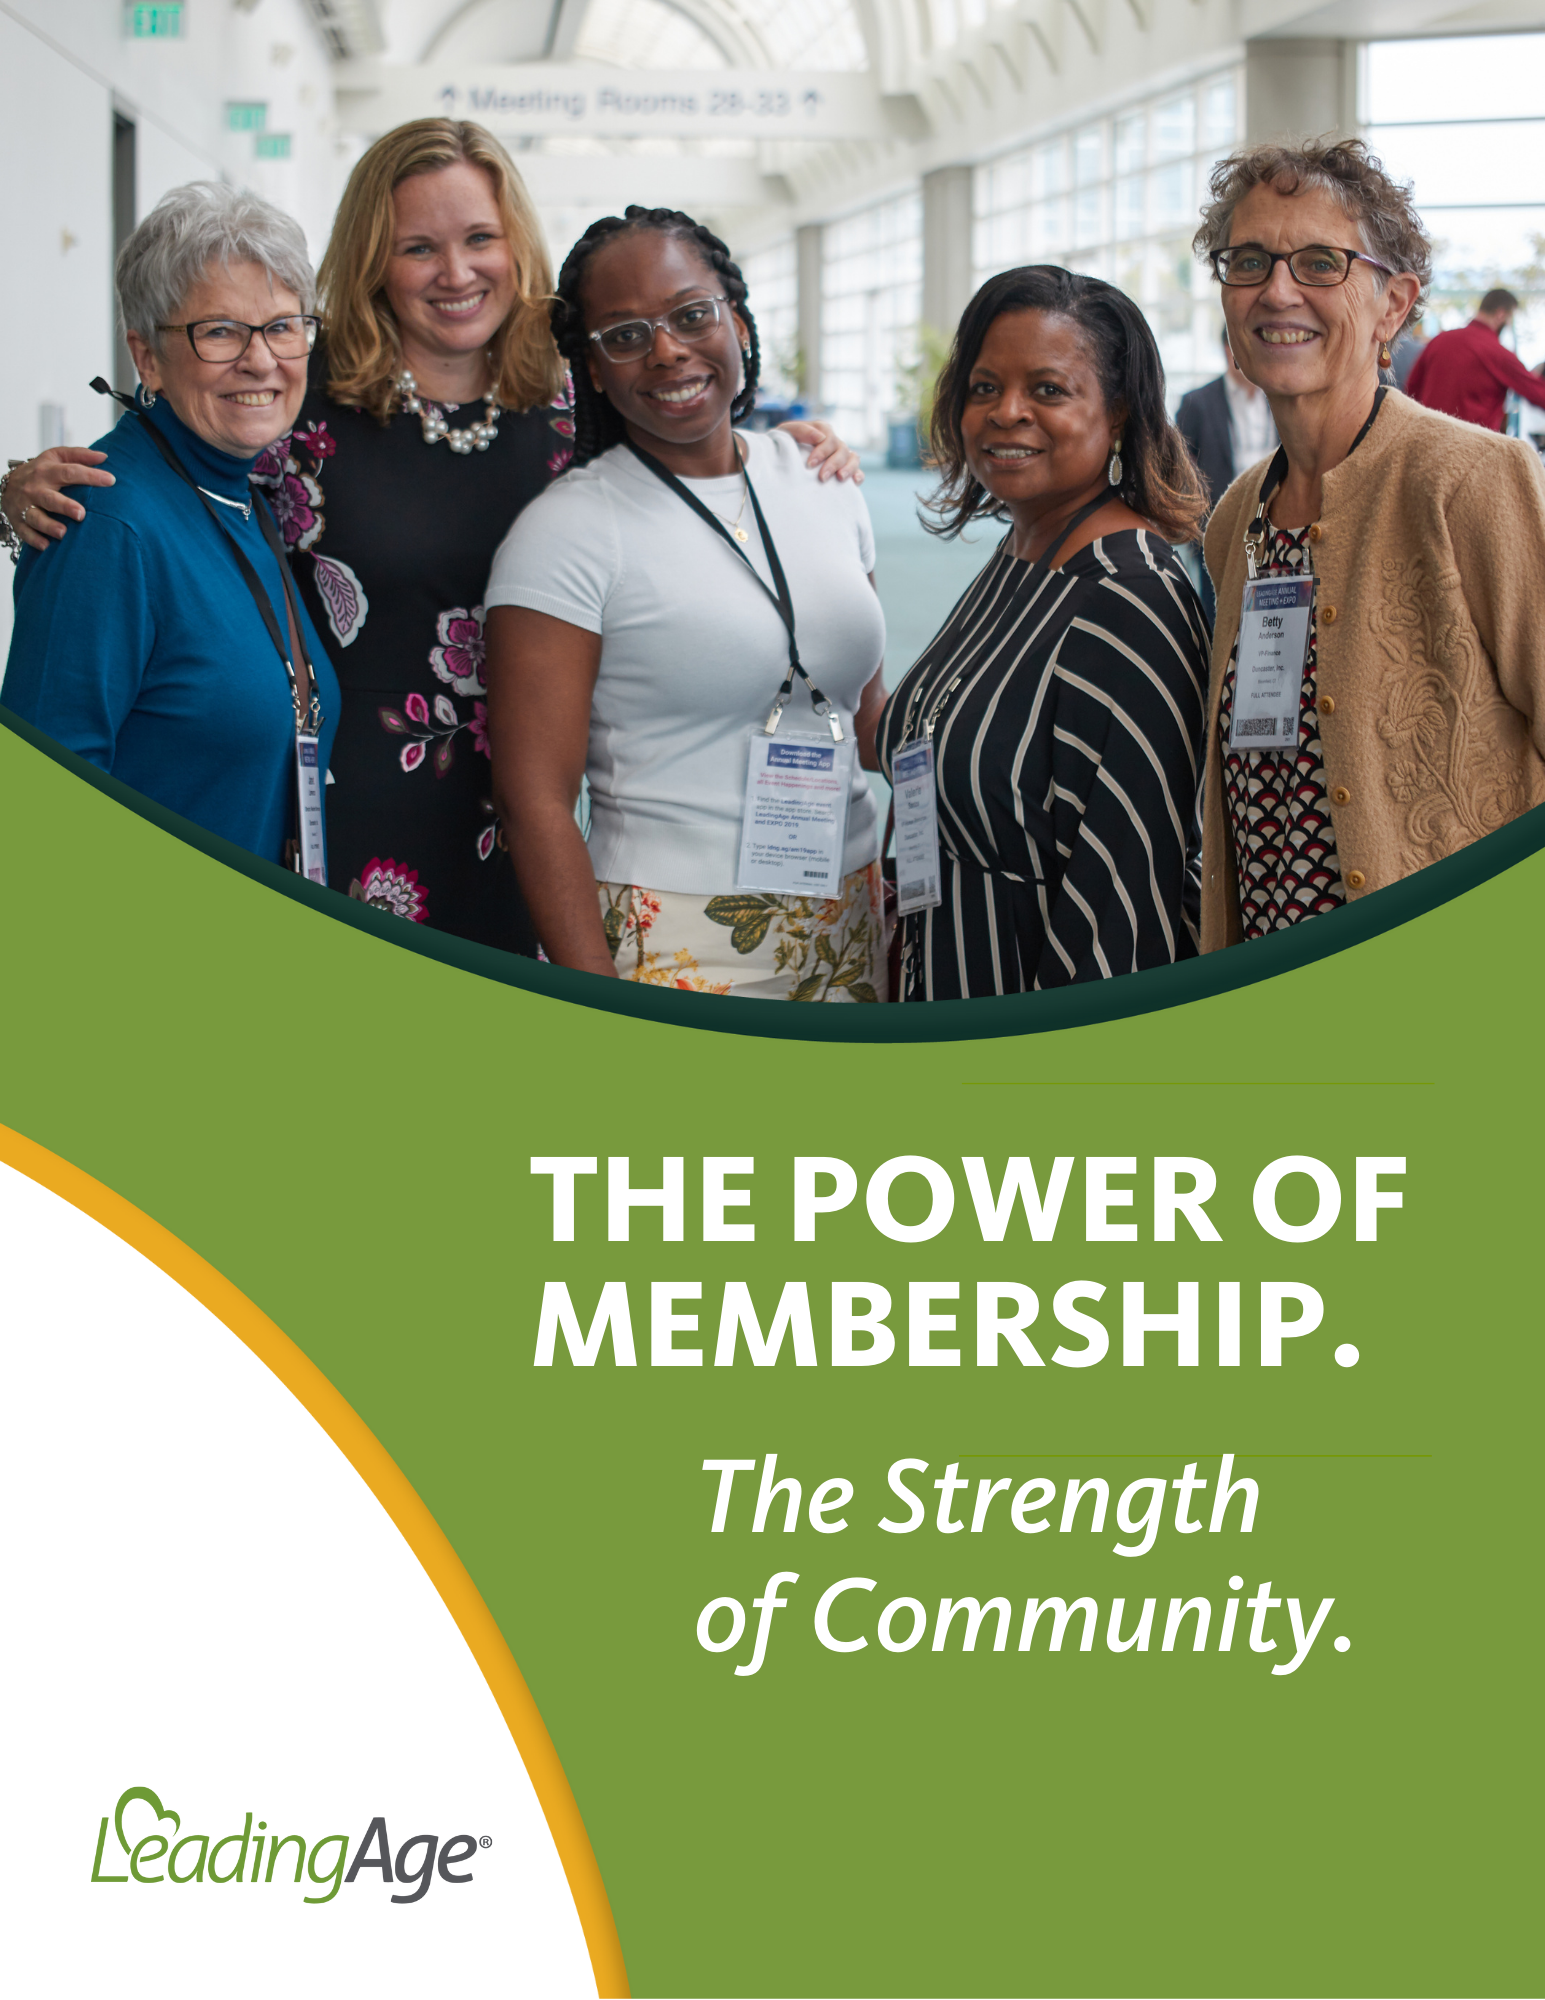 LeadingAgeSC - The Power of Membership, The Strength of Community